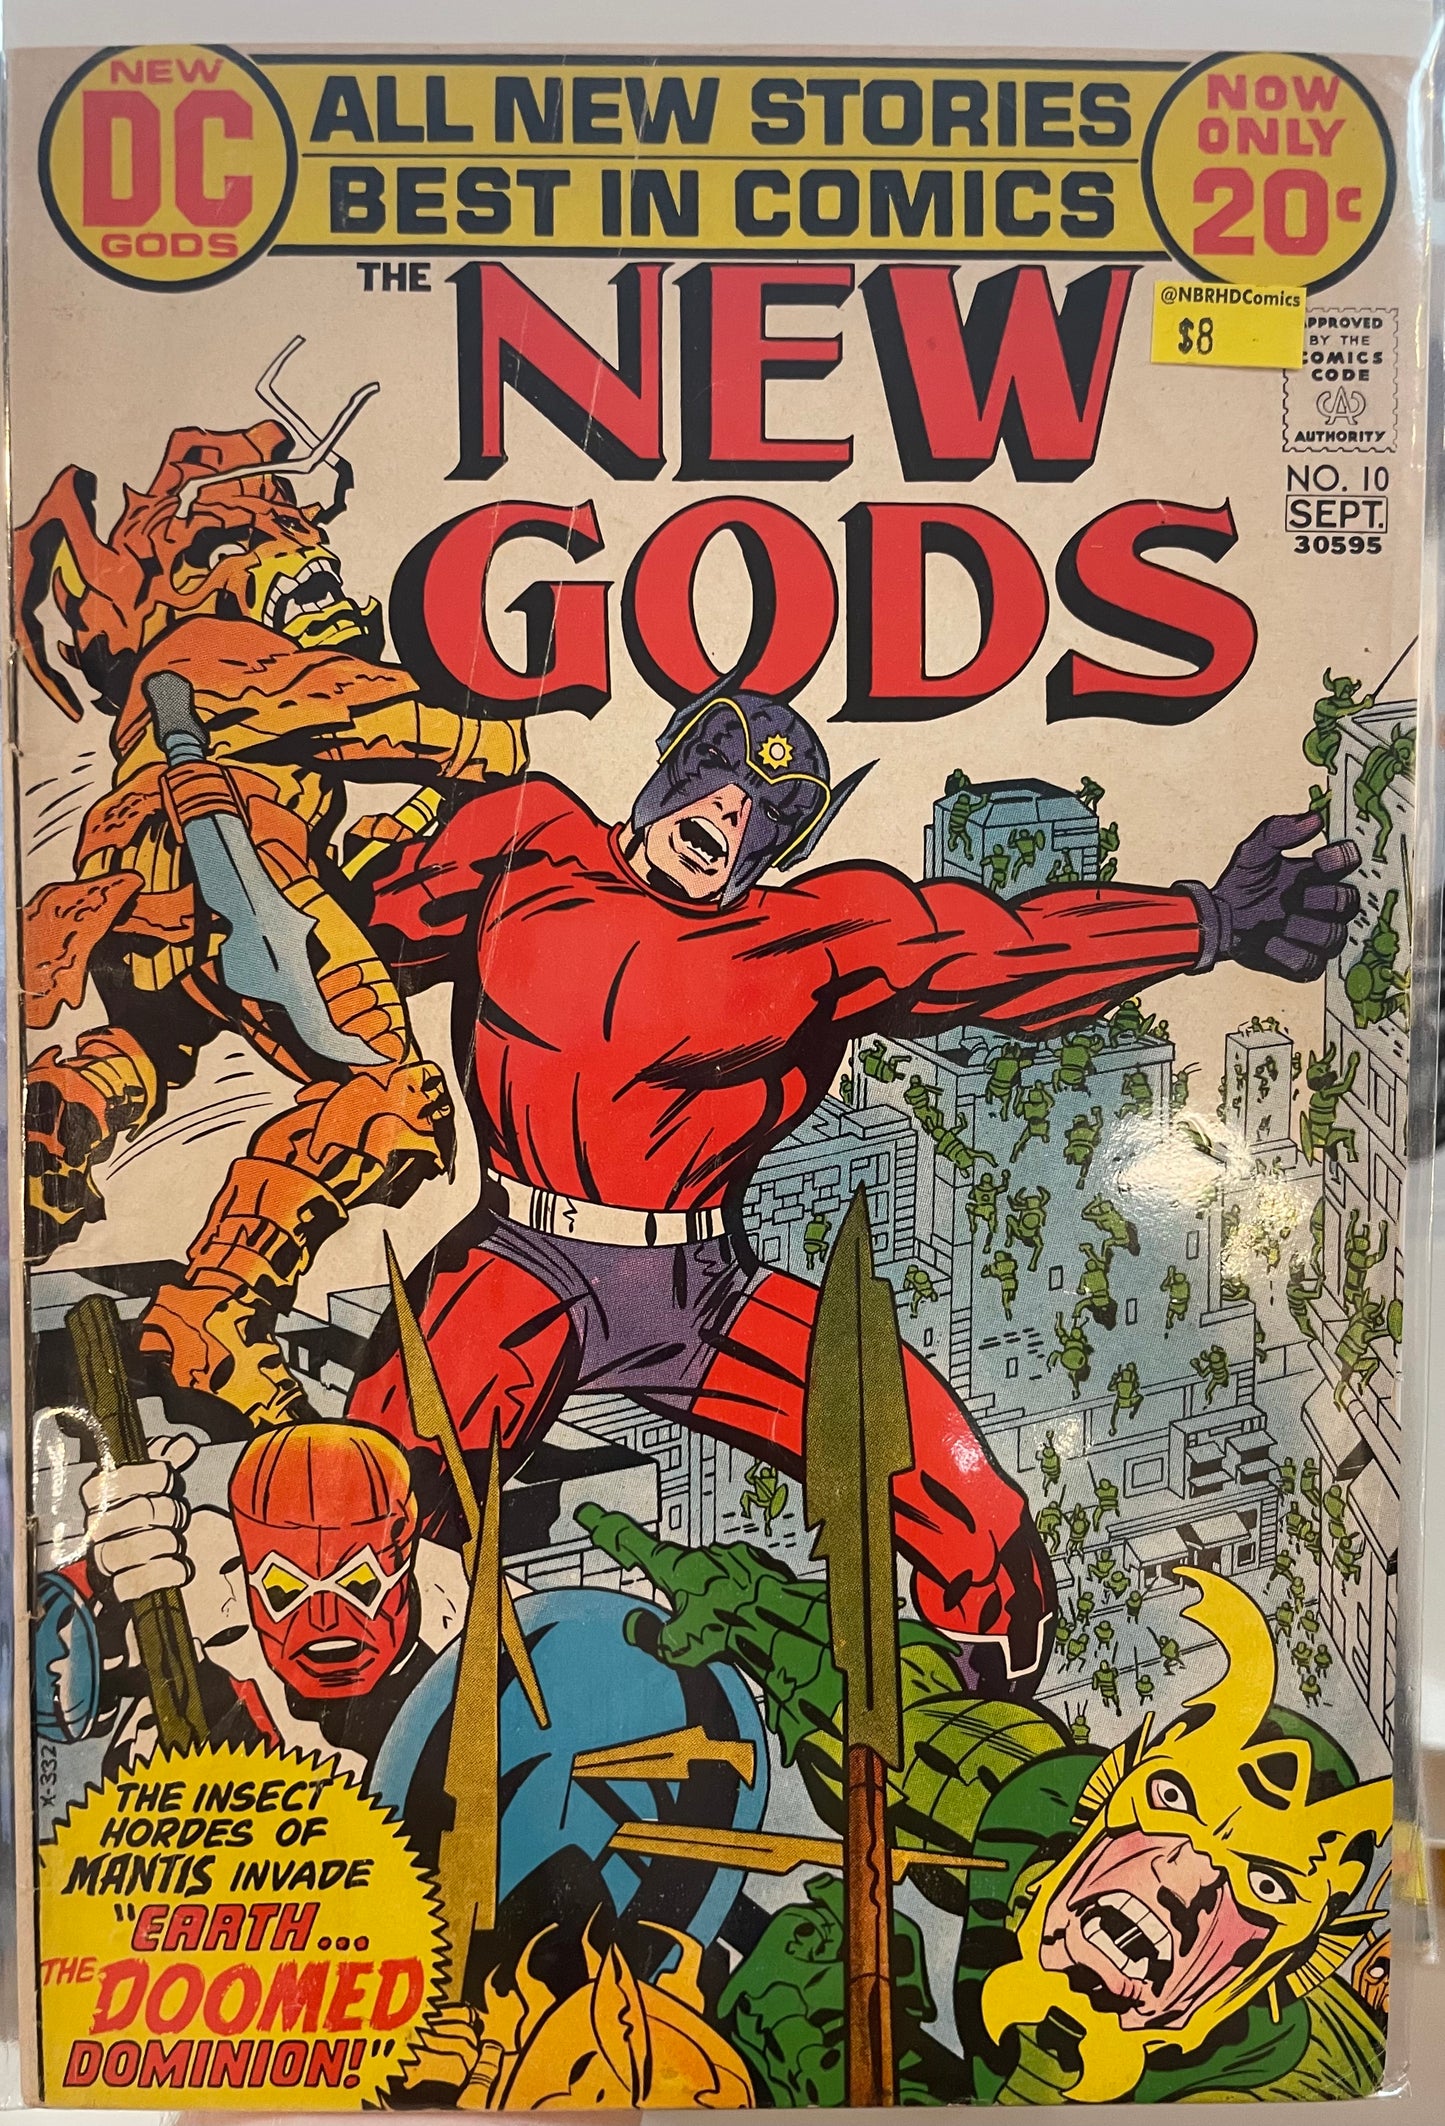 Orion of the New Gods #10